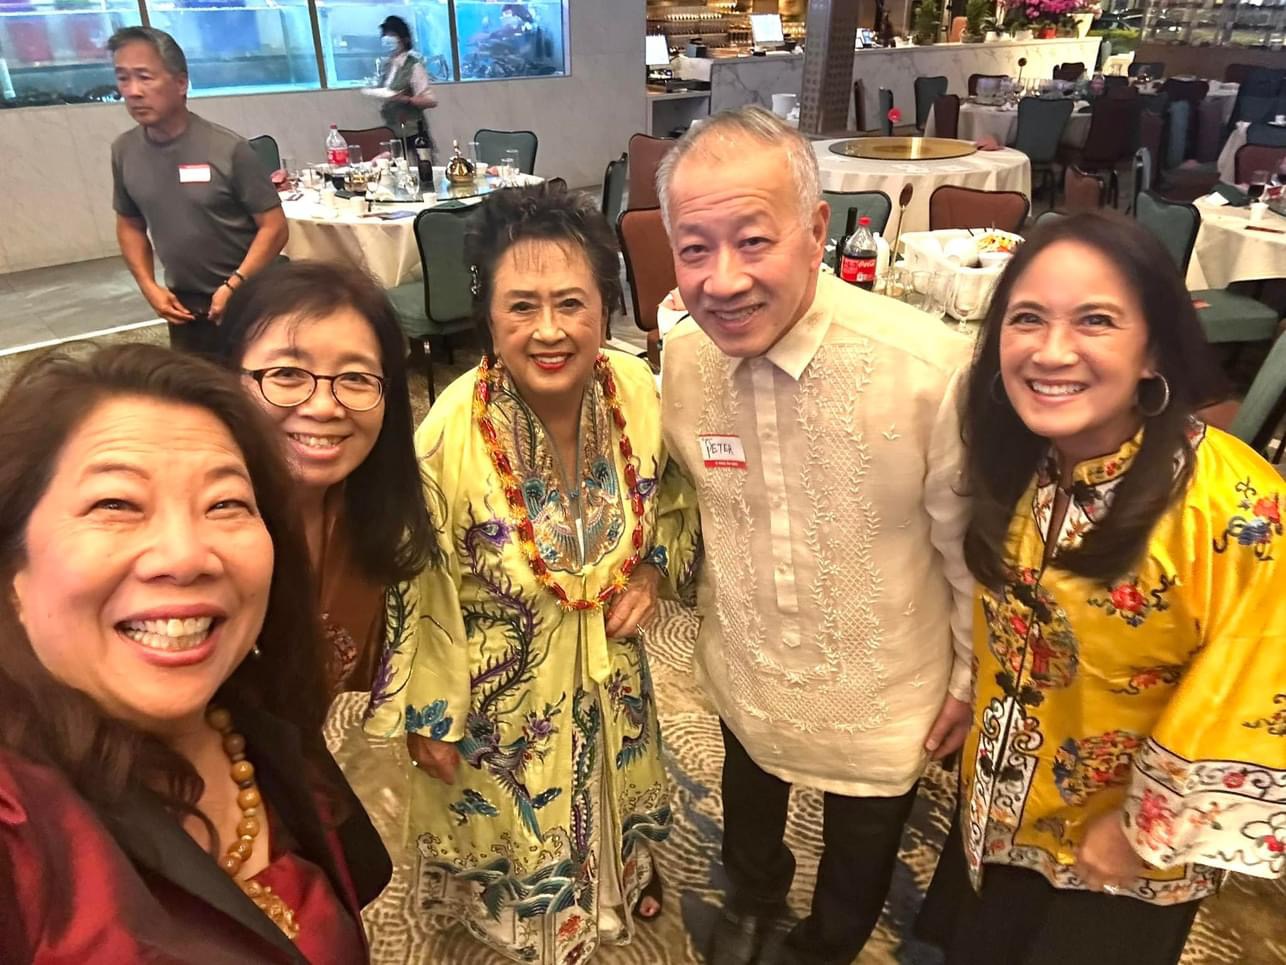 CHCP Advisory Member Leianne Lamb seen with CATS President Cindy Toy, CHCP Co-Founder Gerrye Wong, CHCP Director Peter Young and CHCP Advisory Member Kelly Matsuura 